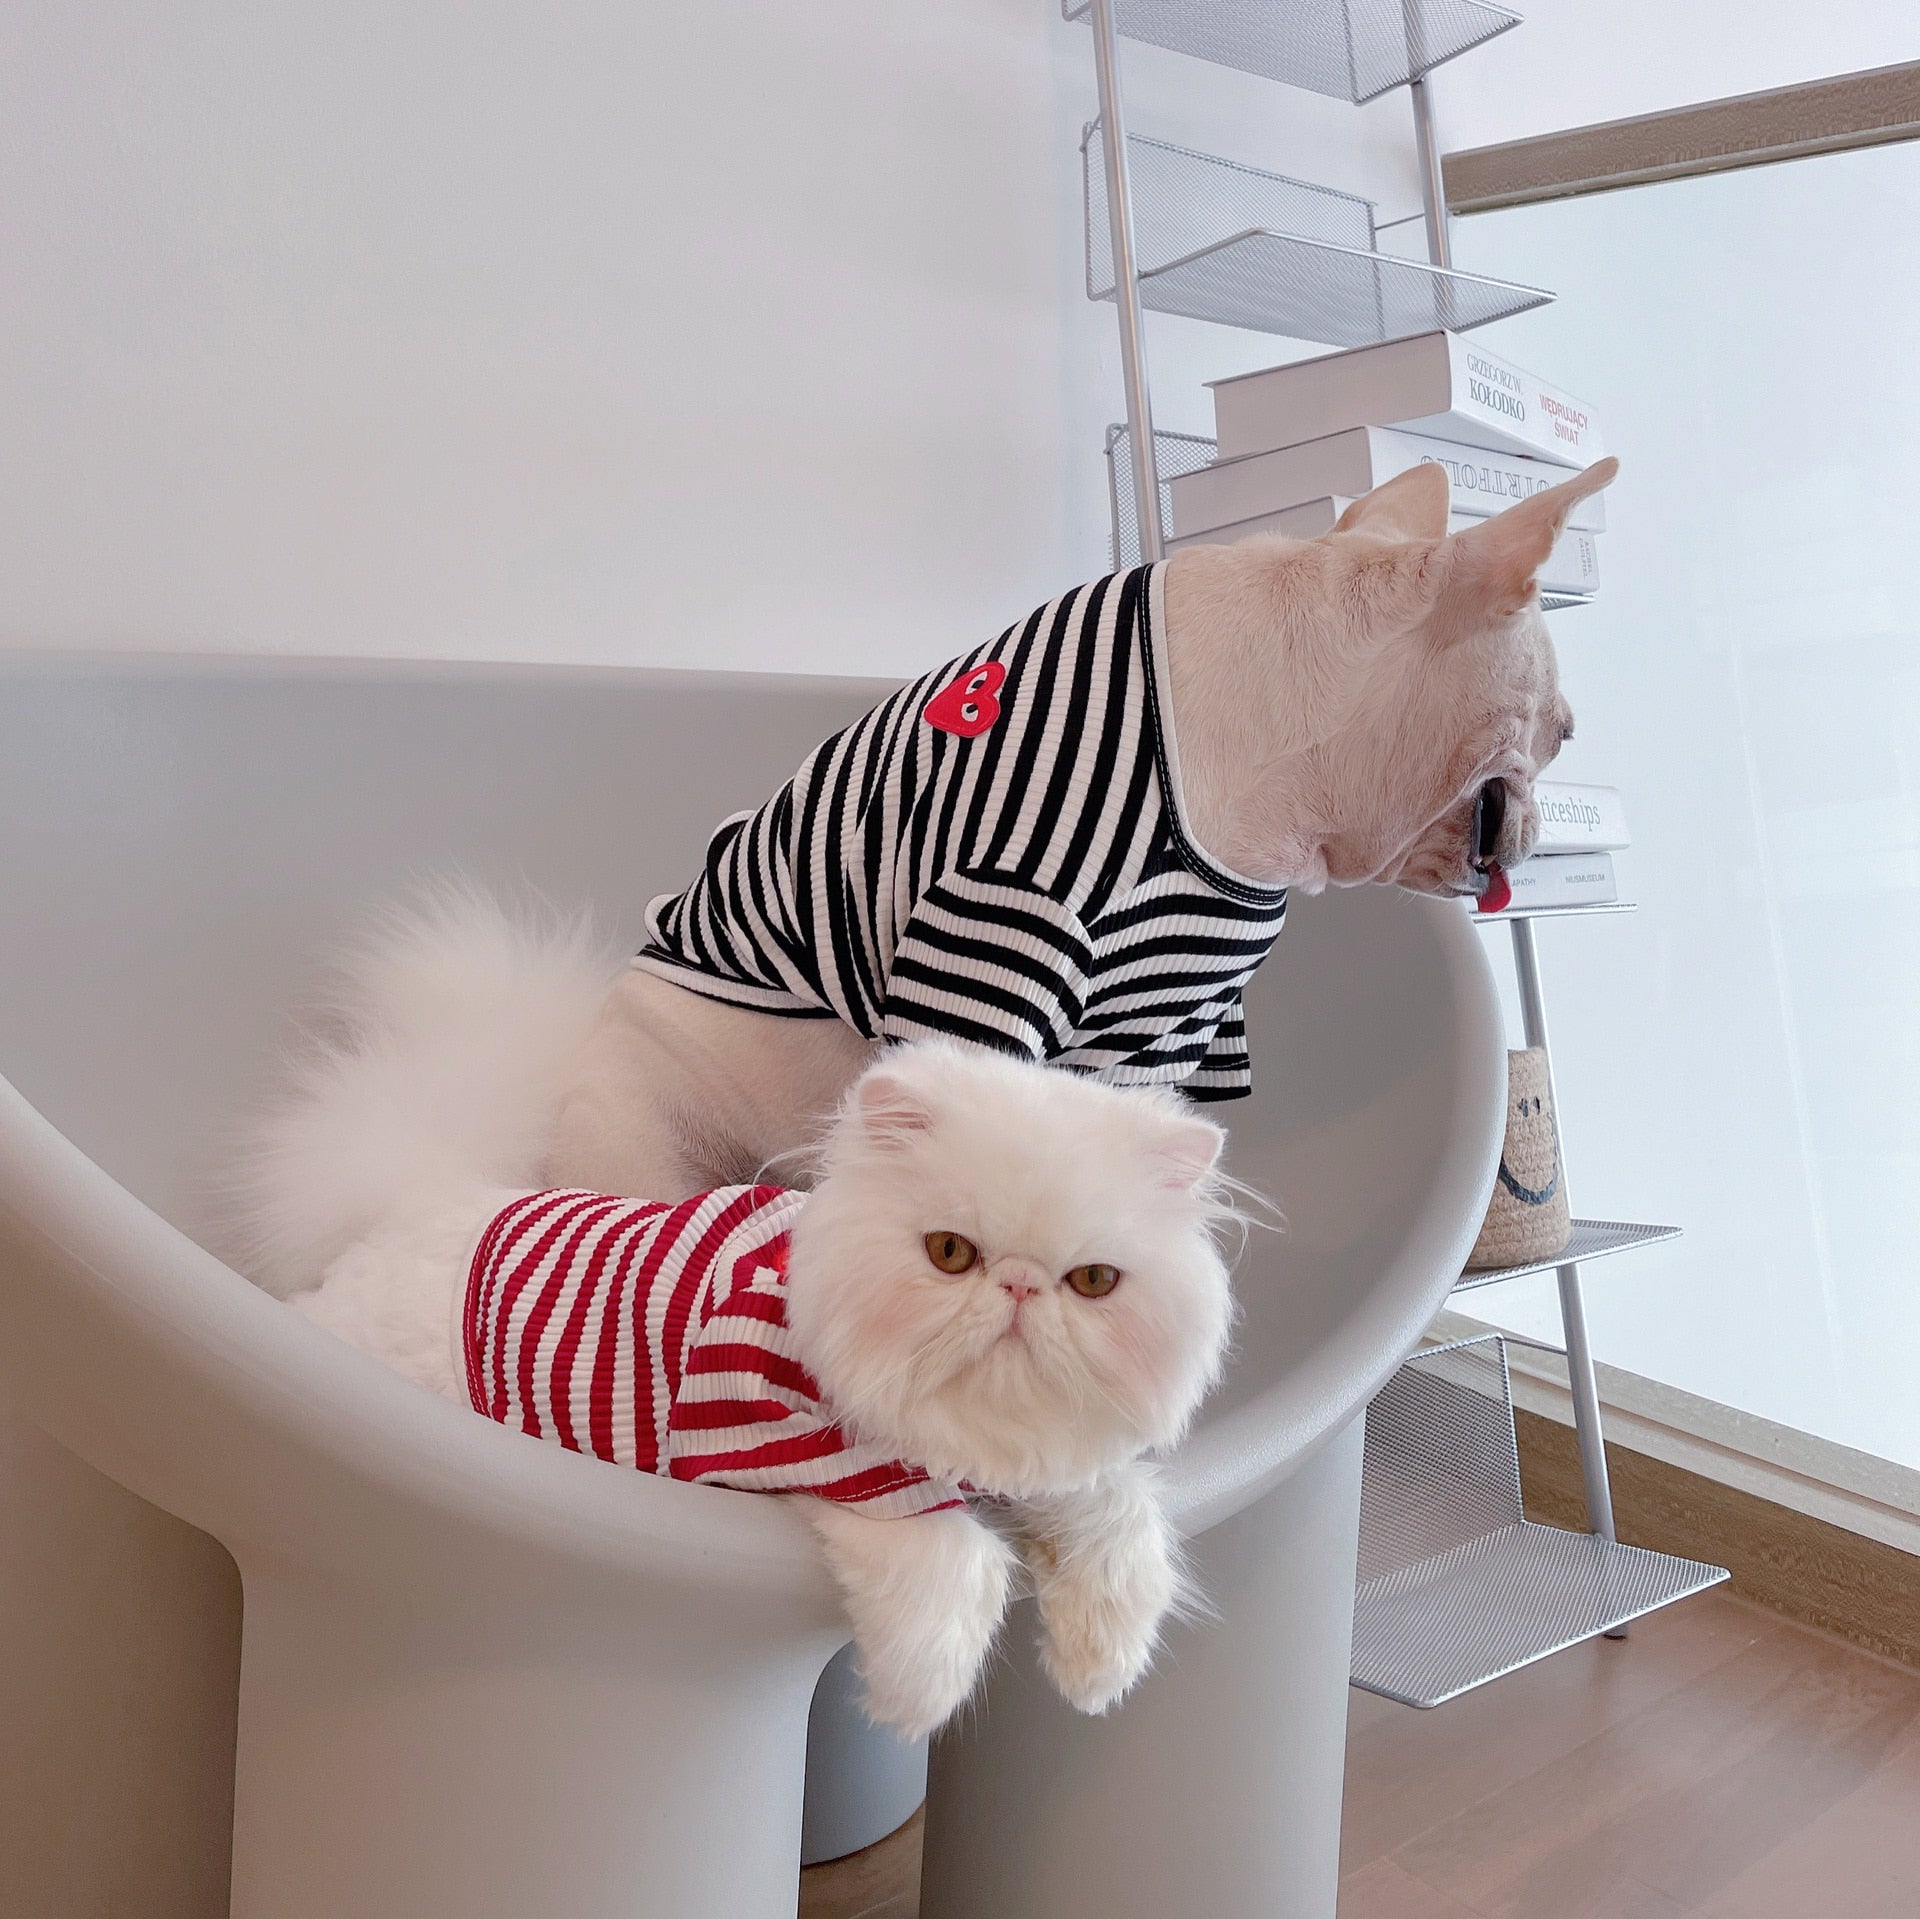 Luxury Style Dog Sweater Clothes for pet